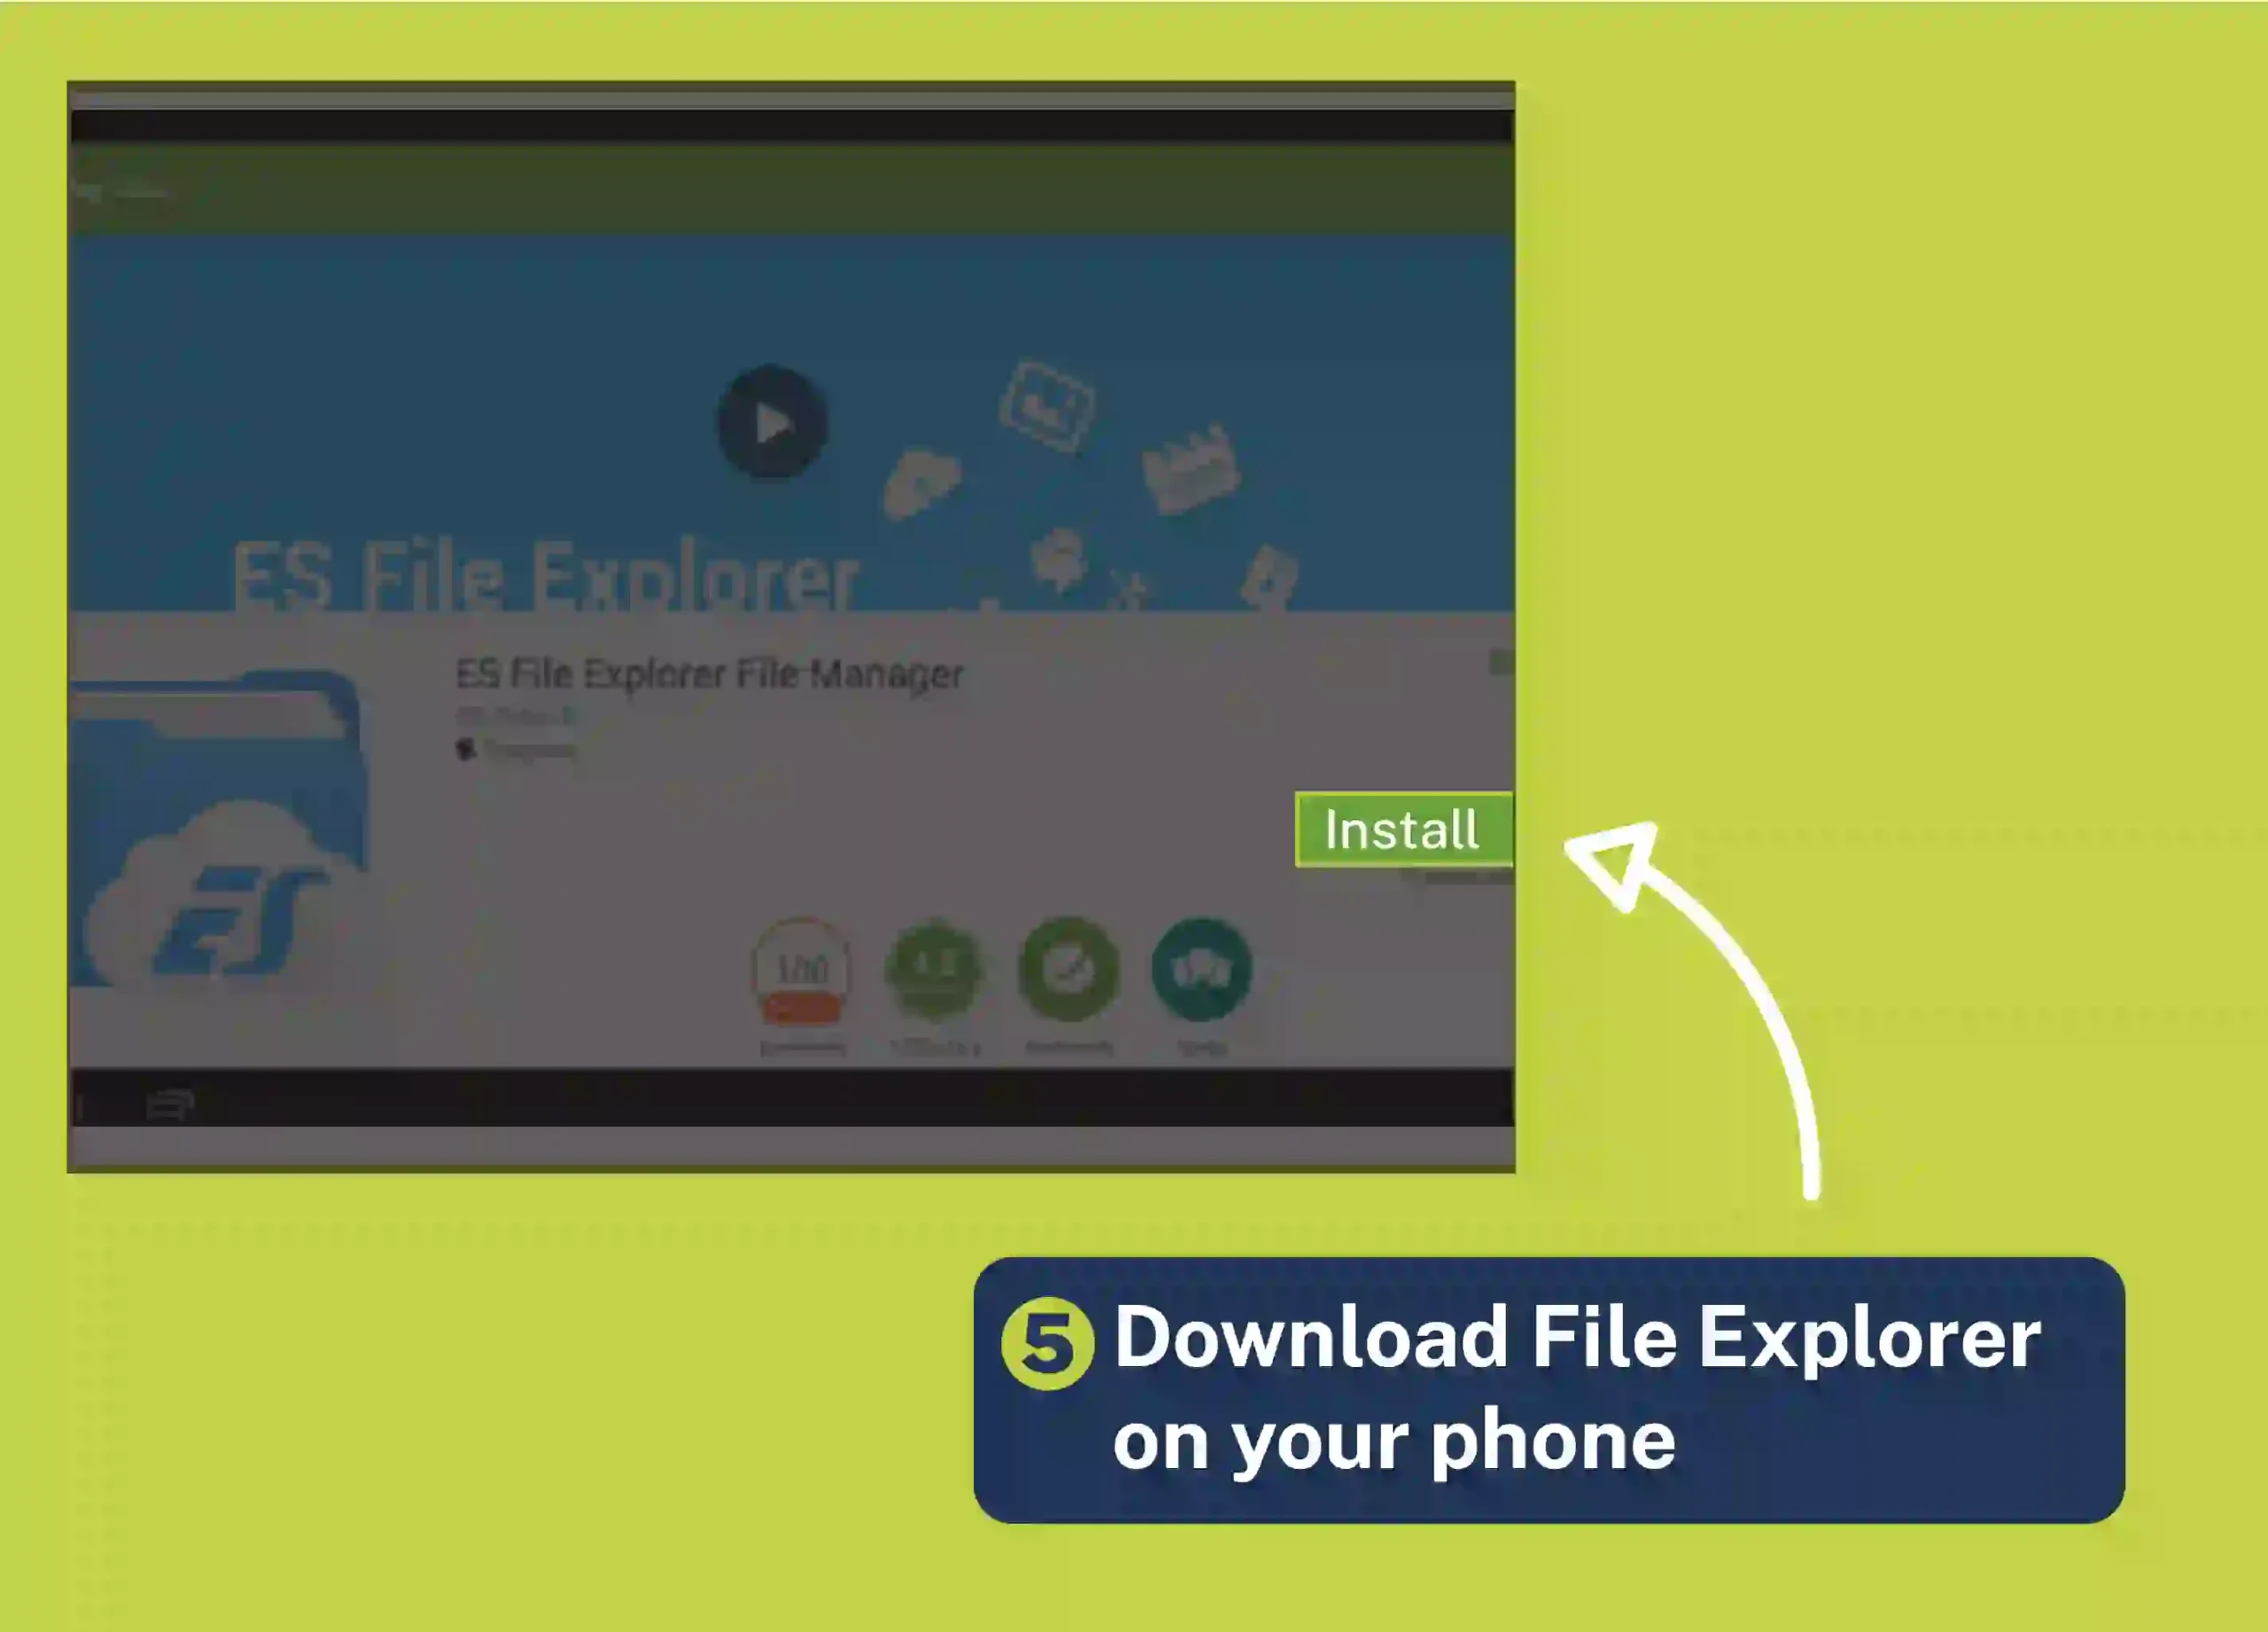 Download File Explorer on your phone to read encrypted WhatsApp messages on pc